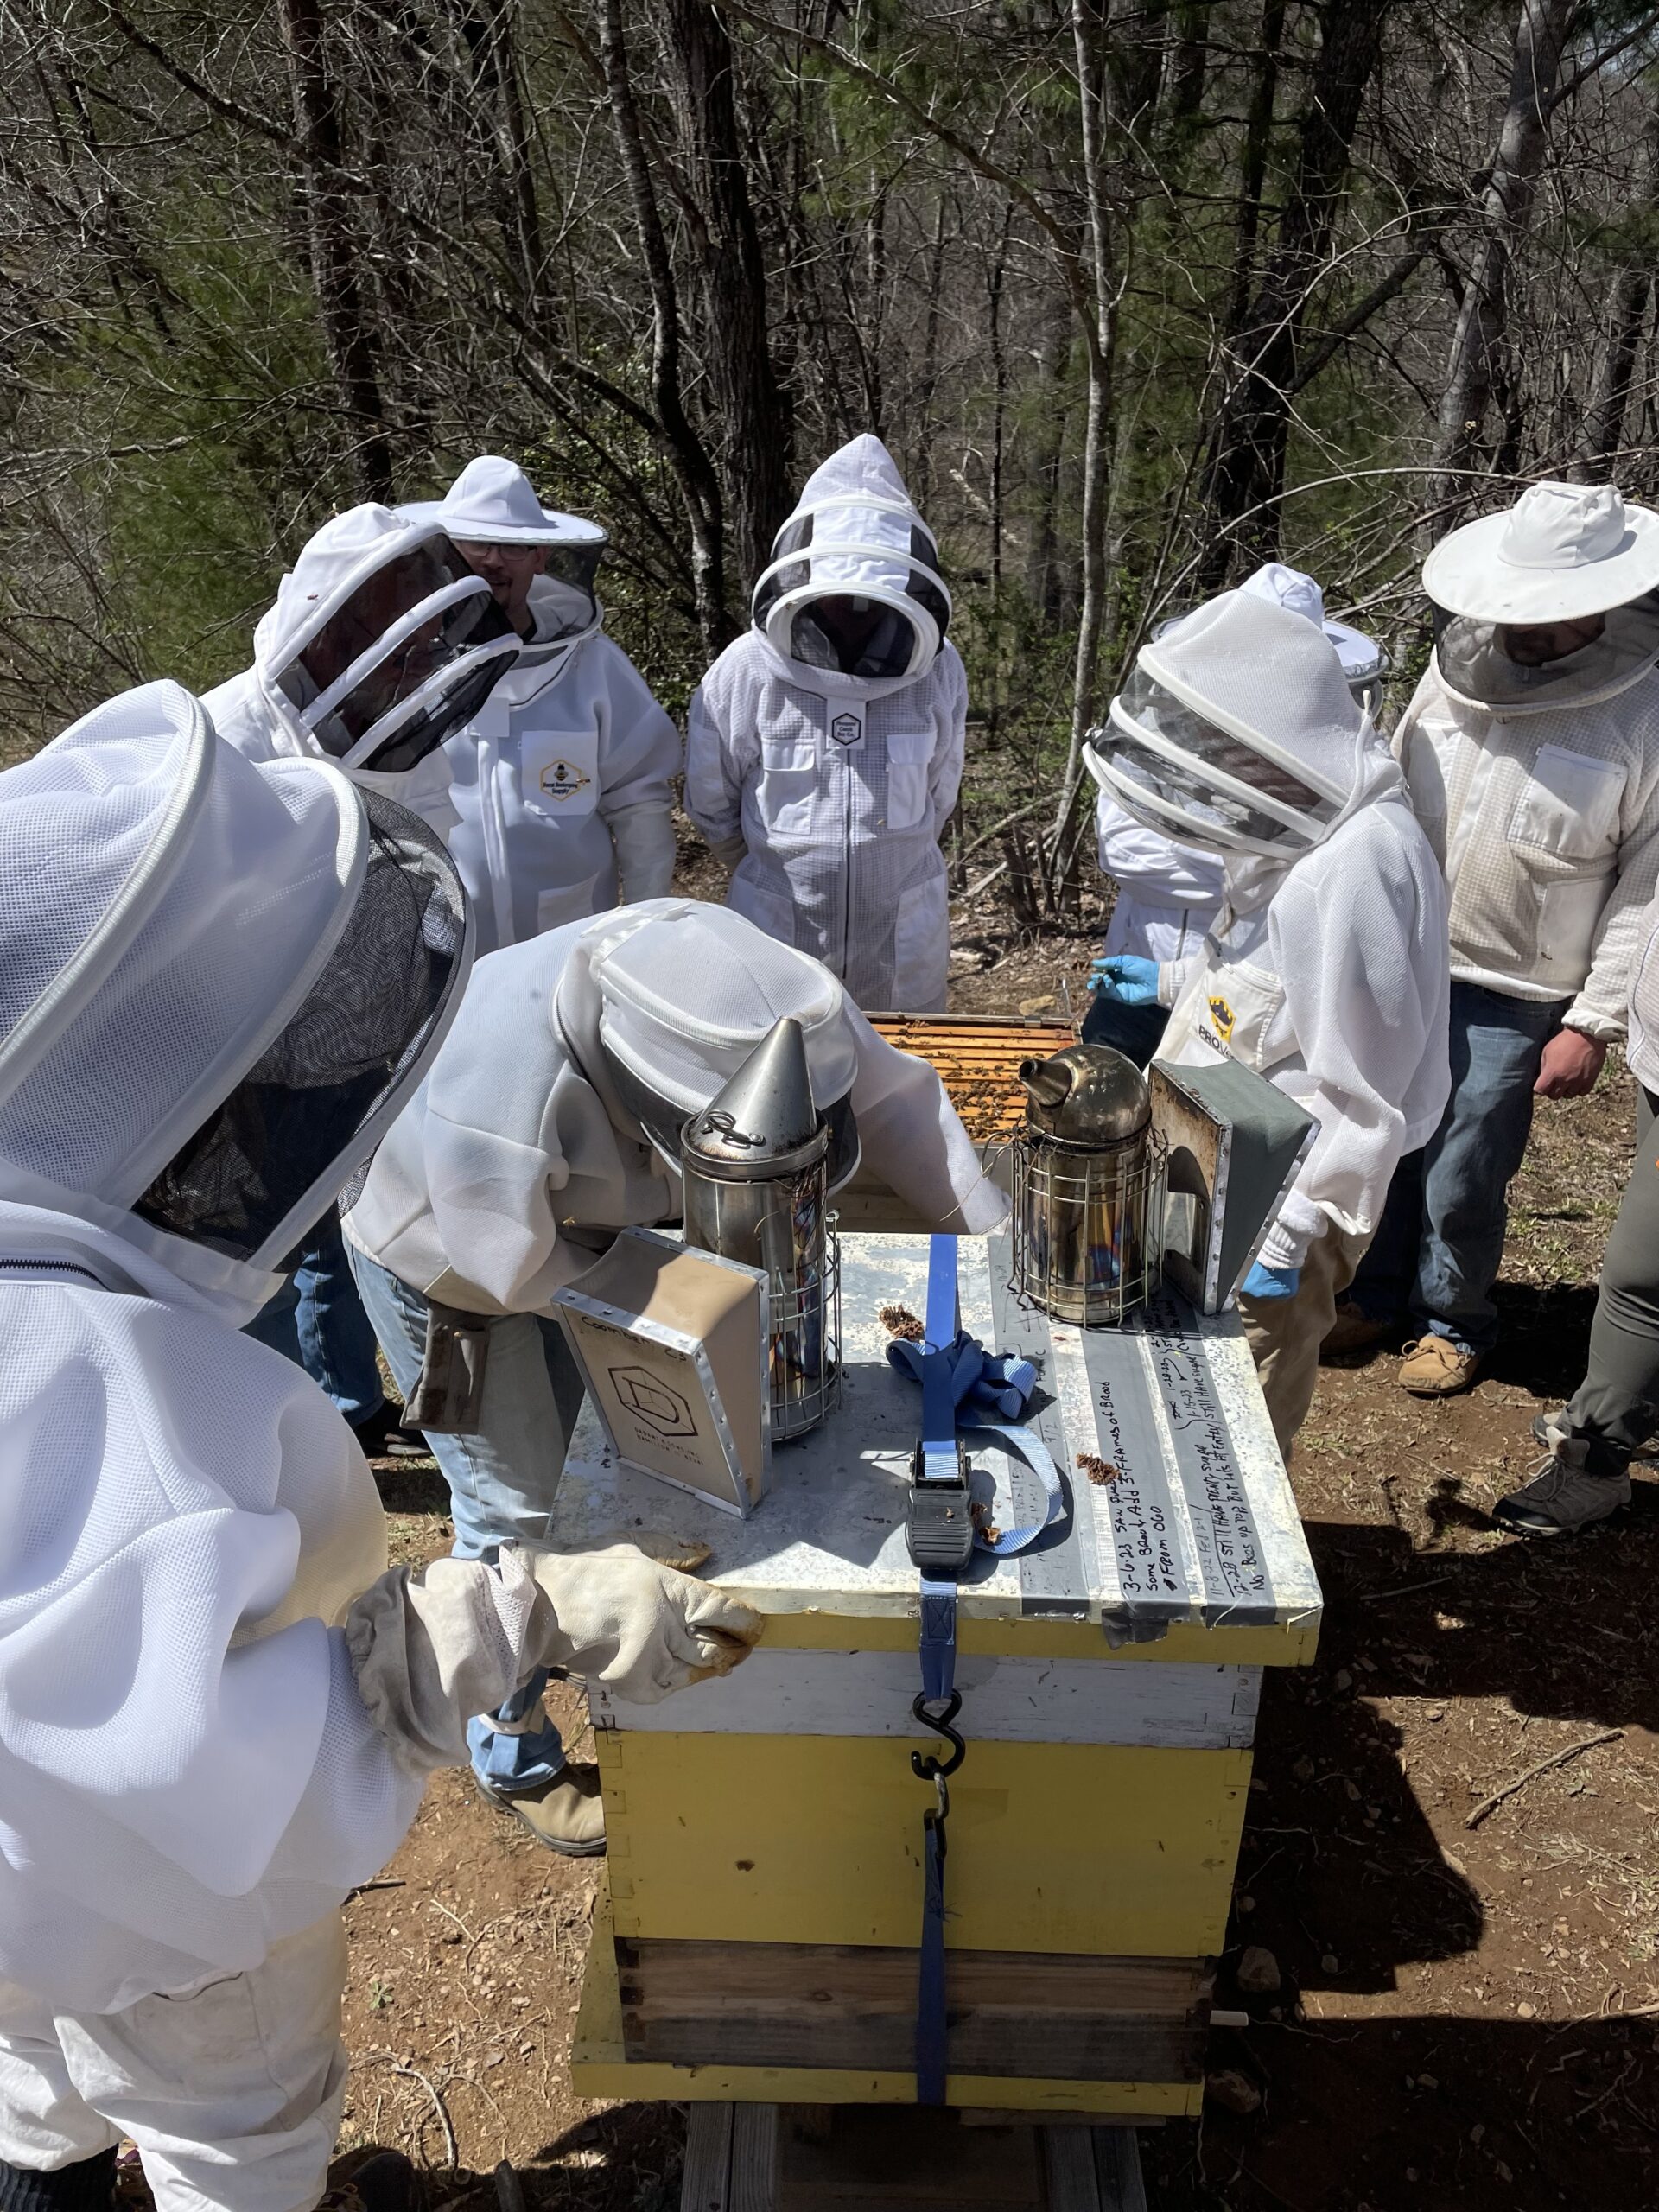 Students at the TCBA Bee Basics school gather around as an instructor shows them how to inspect a hive.